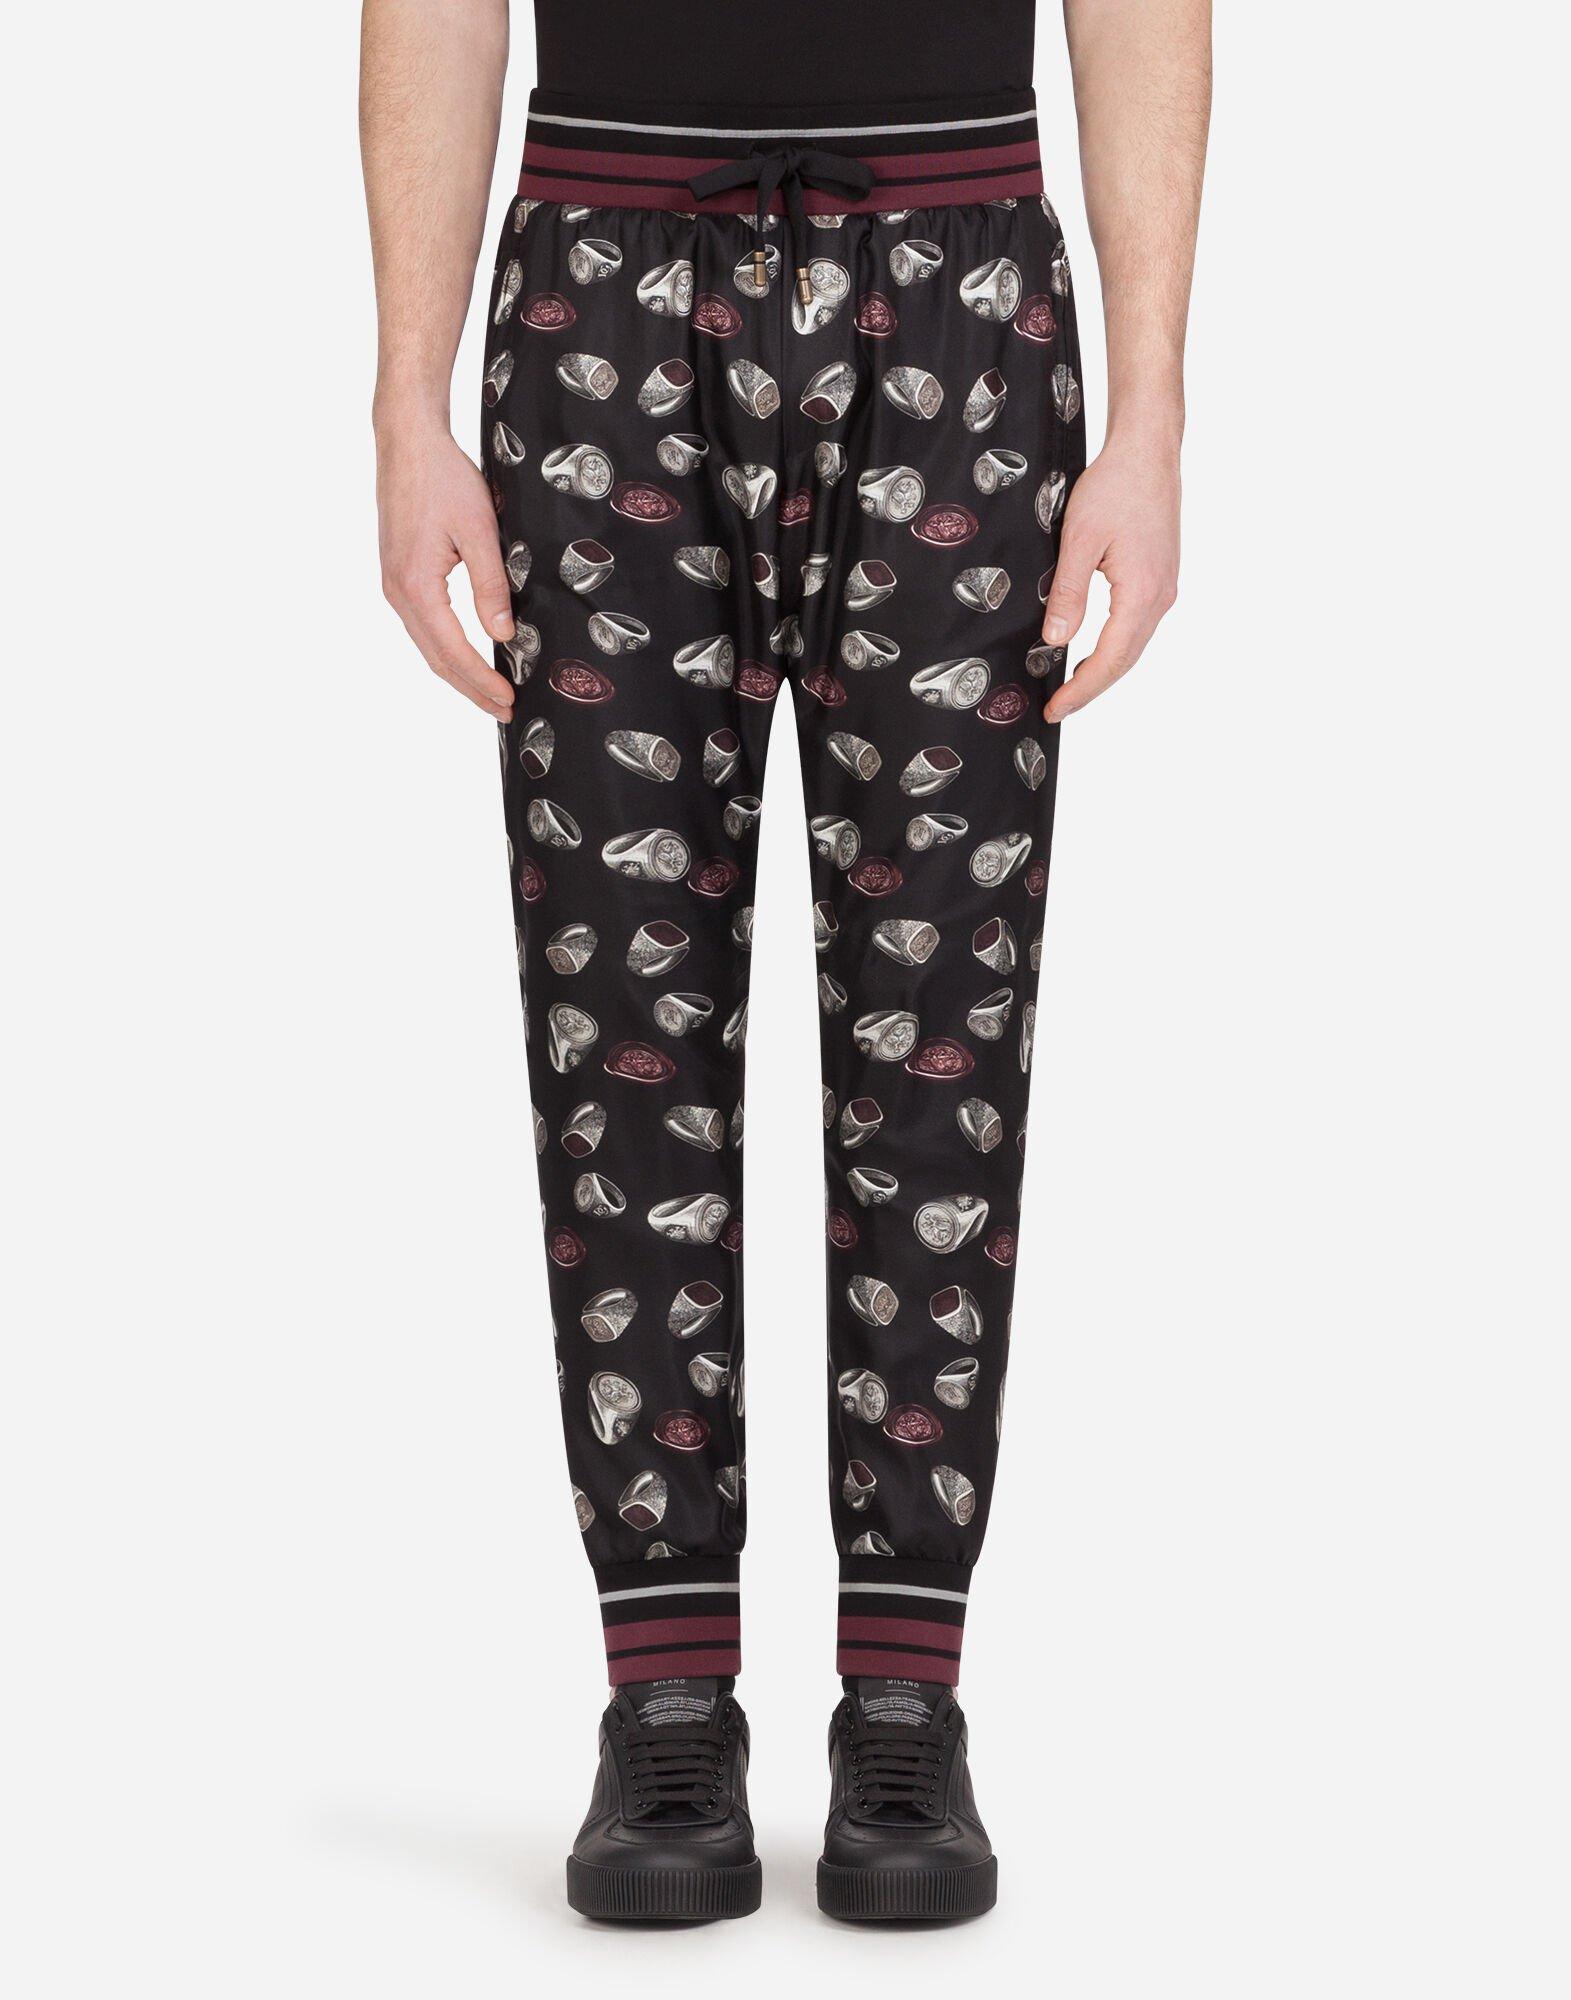 Dolce & Gabbana Silk JOGGING Pants With Ring Print in Black for Men - Lyst